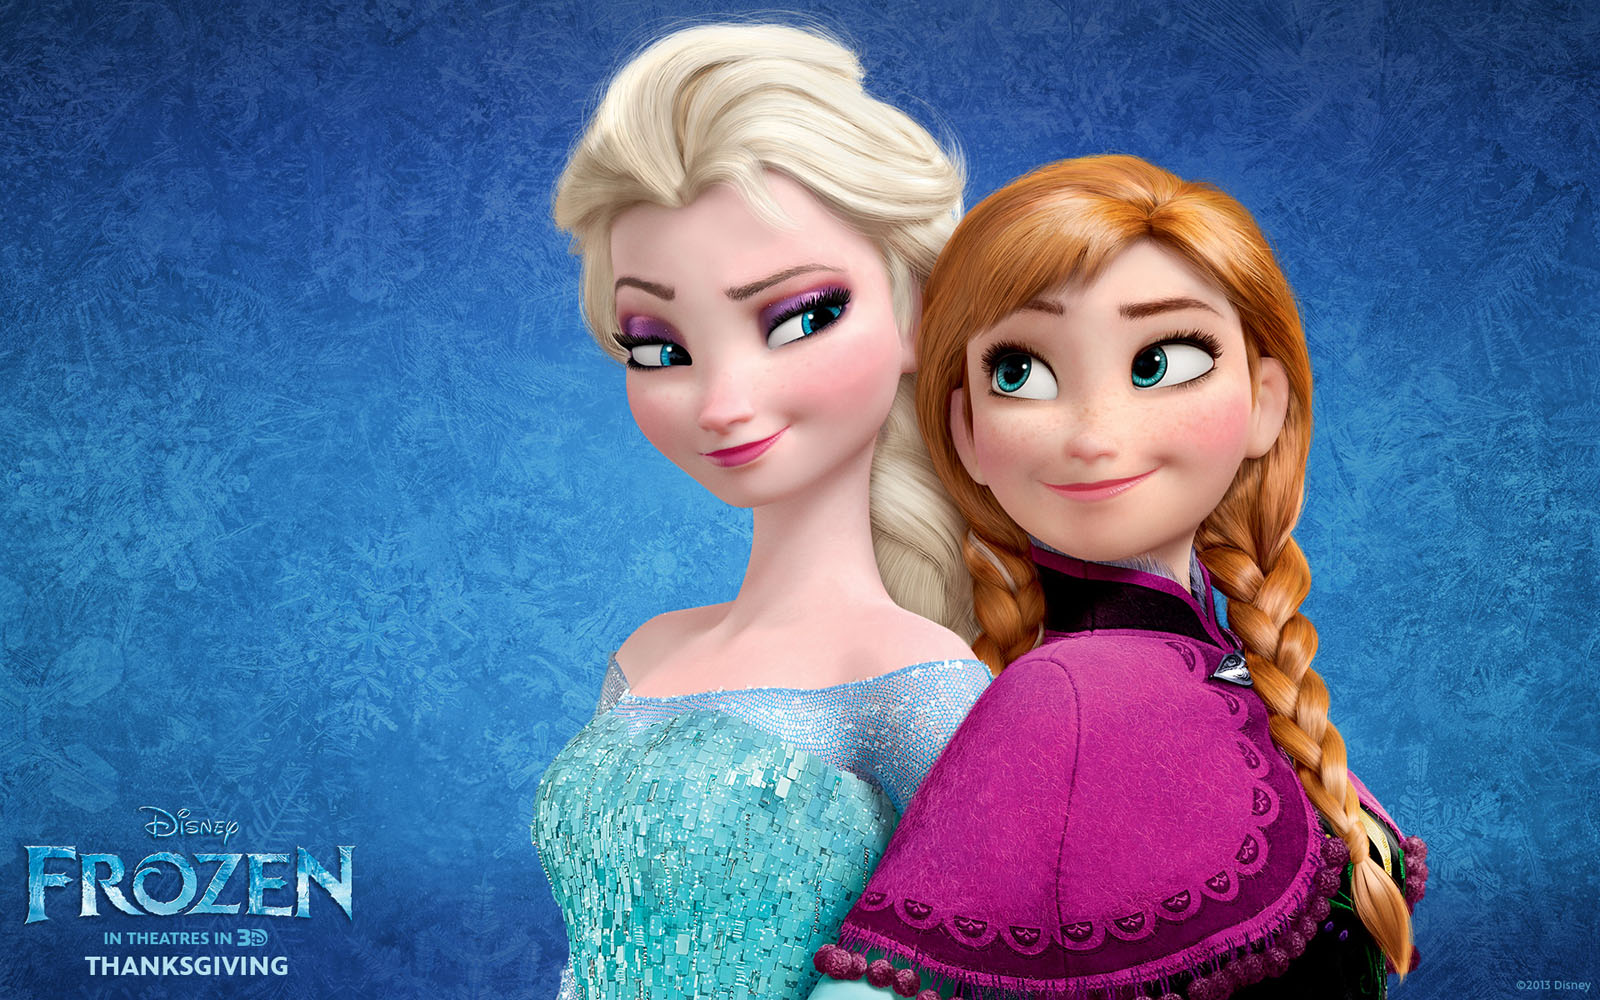 Disney Frozen   25 Character designs Wallpapers and Trailers from